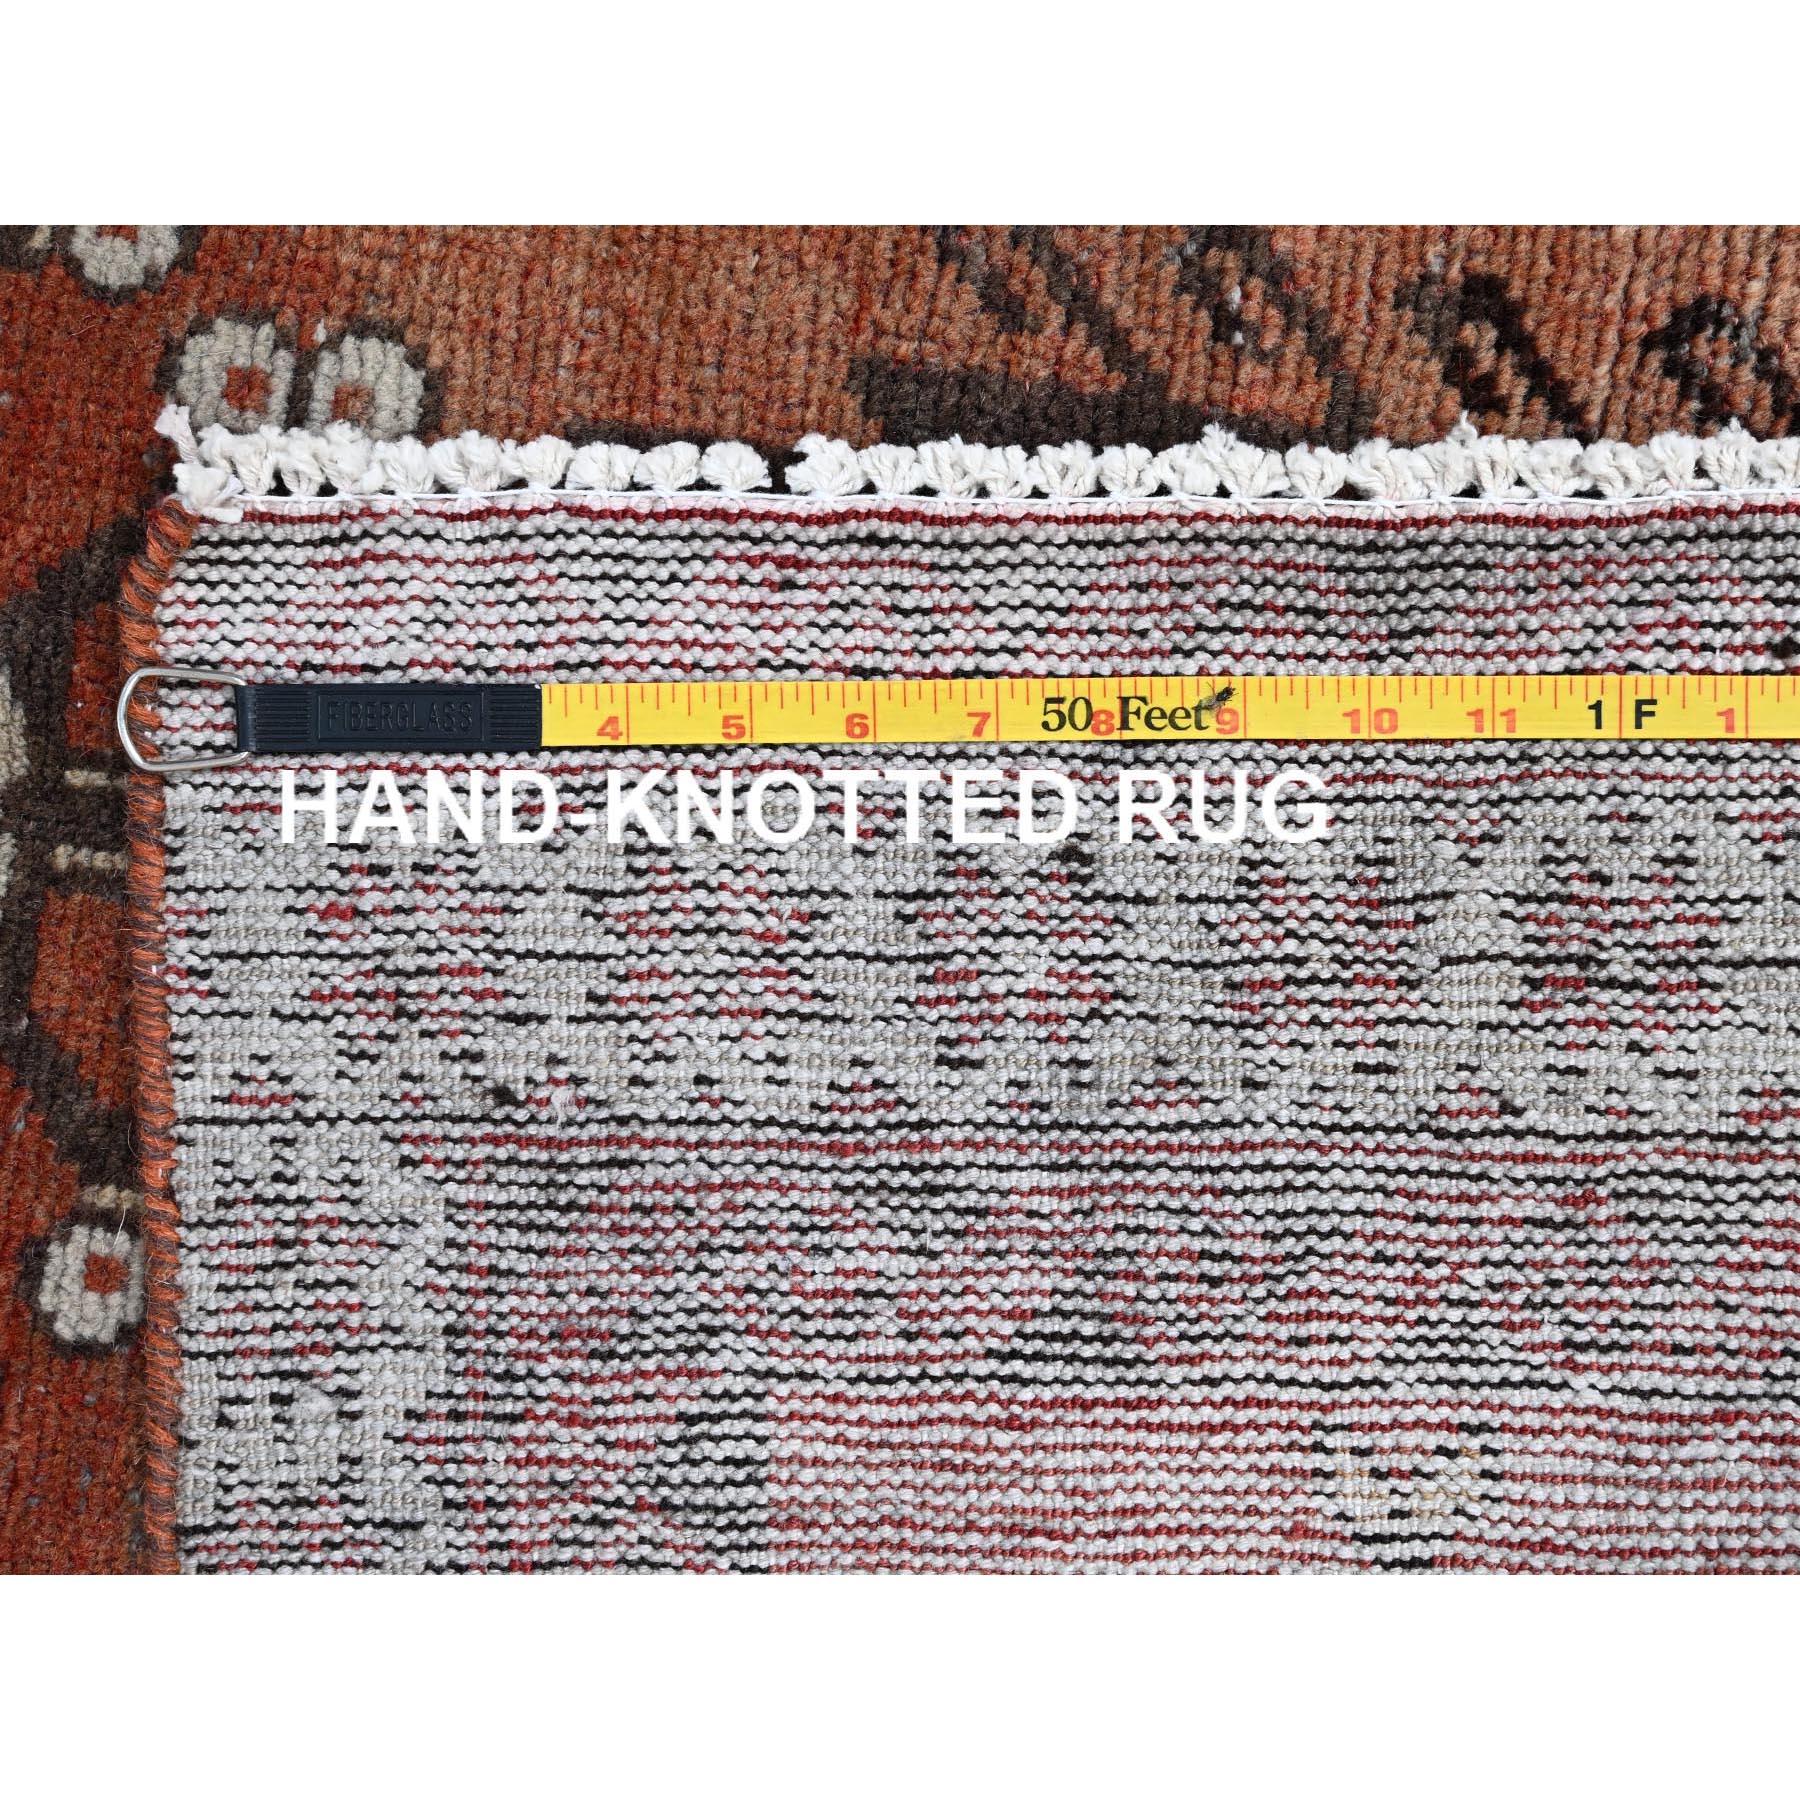 This fabulous Hand-Knotted carpet has been created and designed for extra strength and durability. This rug has been handcrafted for weeks in the traditional method that is used to make
Exact Rug Size in Feet and Inches : 3'7